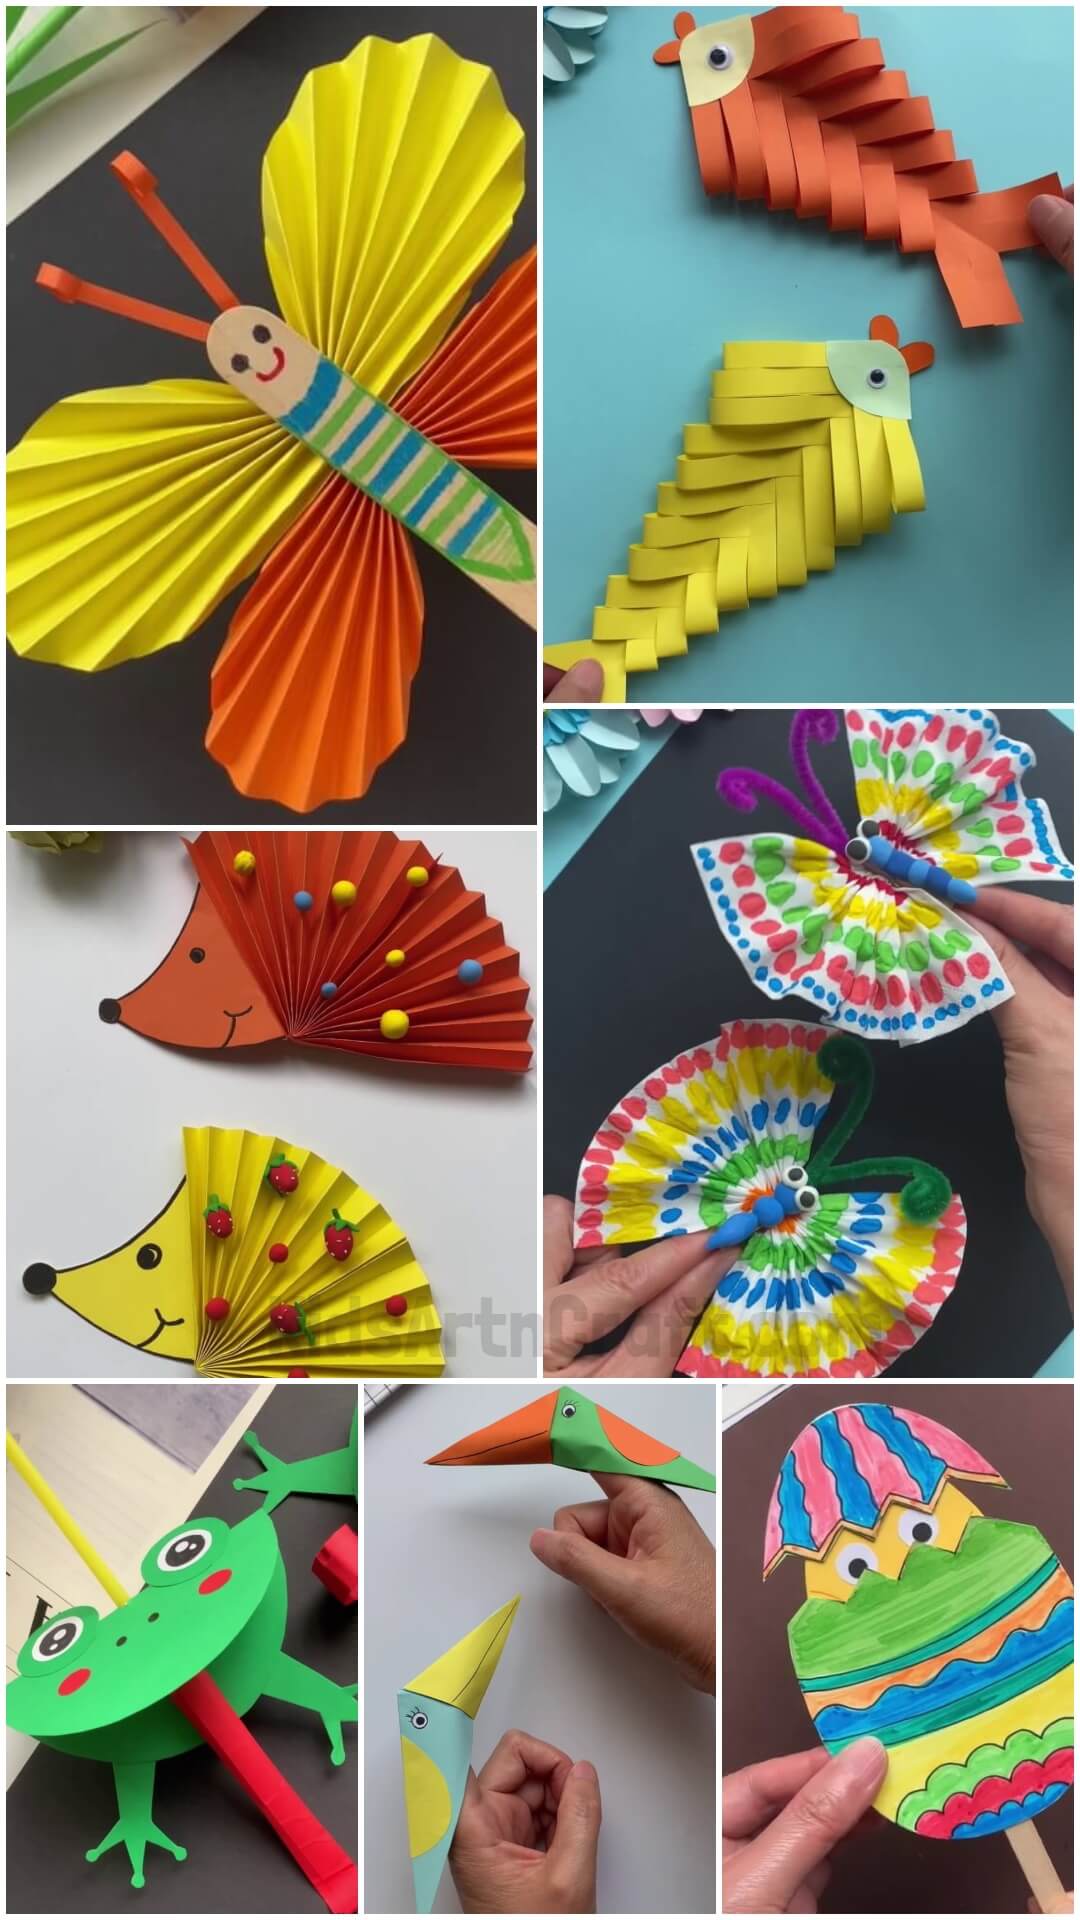 DIY Paper Crafts to Have Fun with Kids